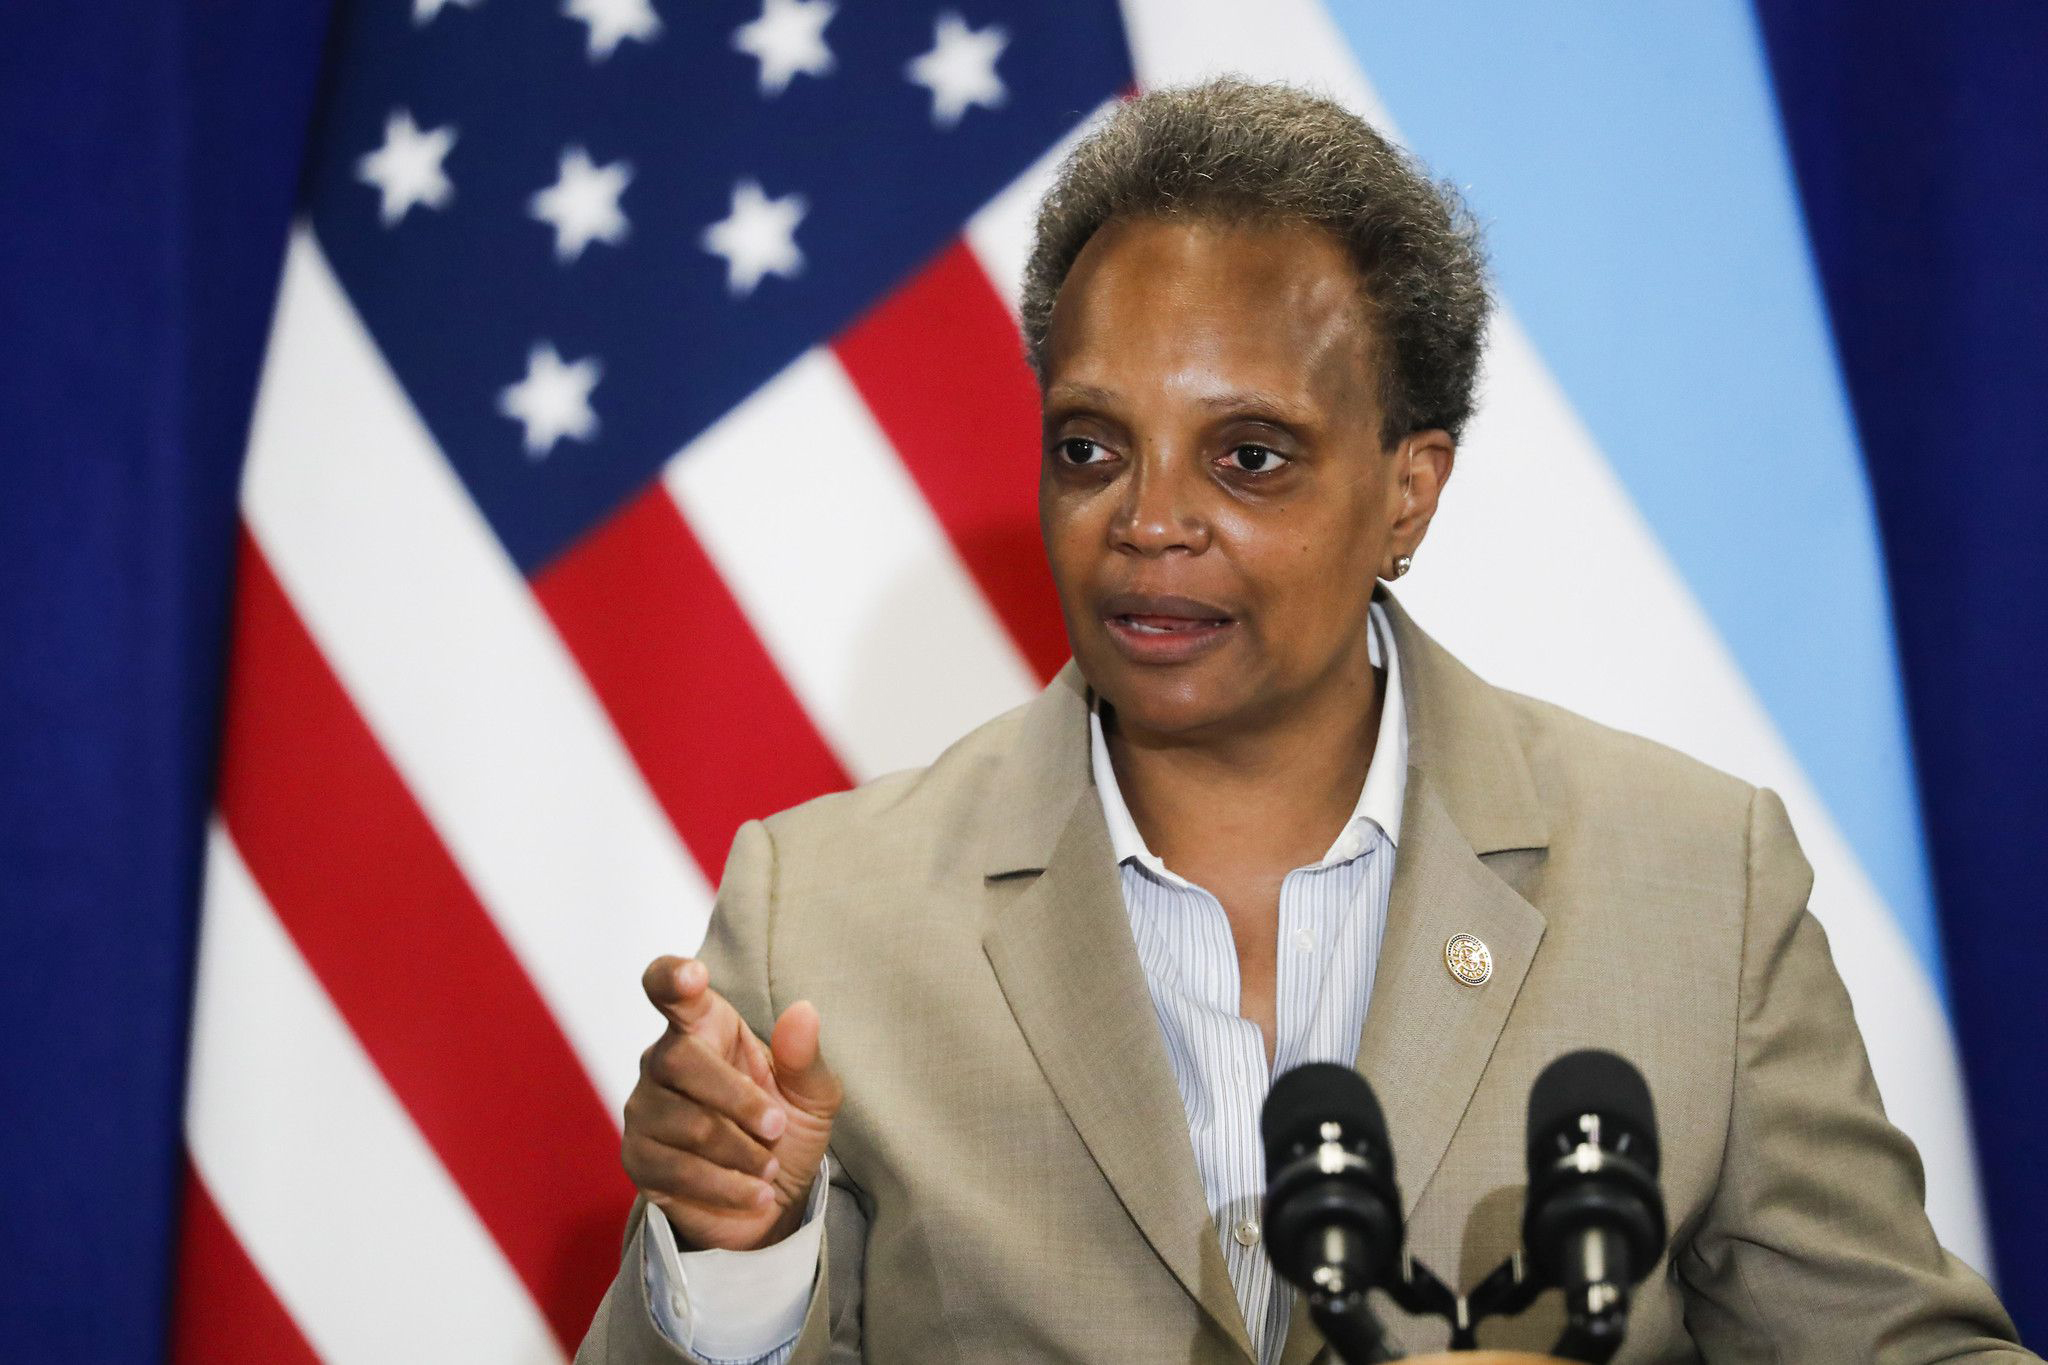 PHOTO: Mayor of Chicago, Lori Lightfoot speaks at a press conference, June 15, 2020.